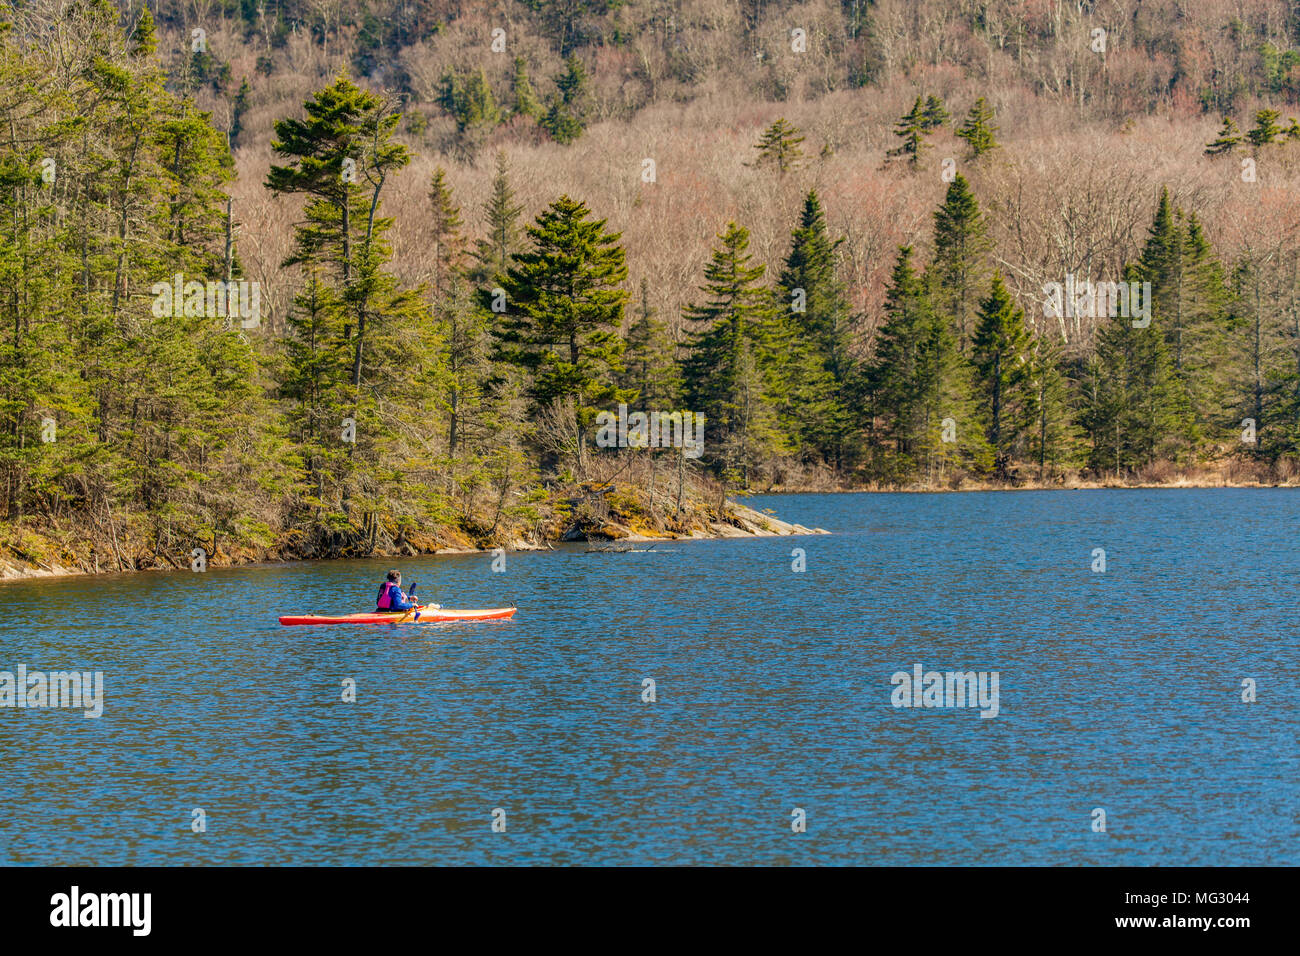 Kayaking on Beaver Pond at Kinsman Notch located beside Rt. 112, the Kancamagus Highway, in the White Mountains of New Hampshire in Woodstock. Stock Photo